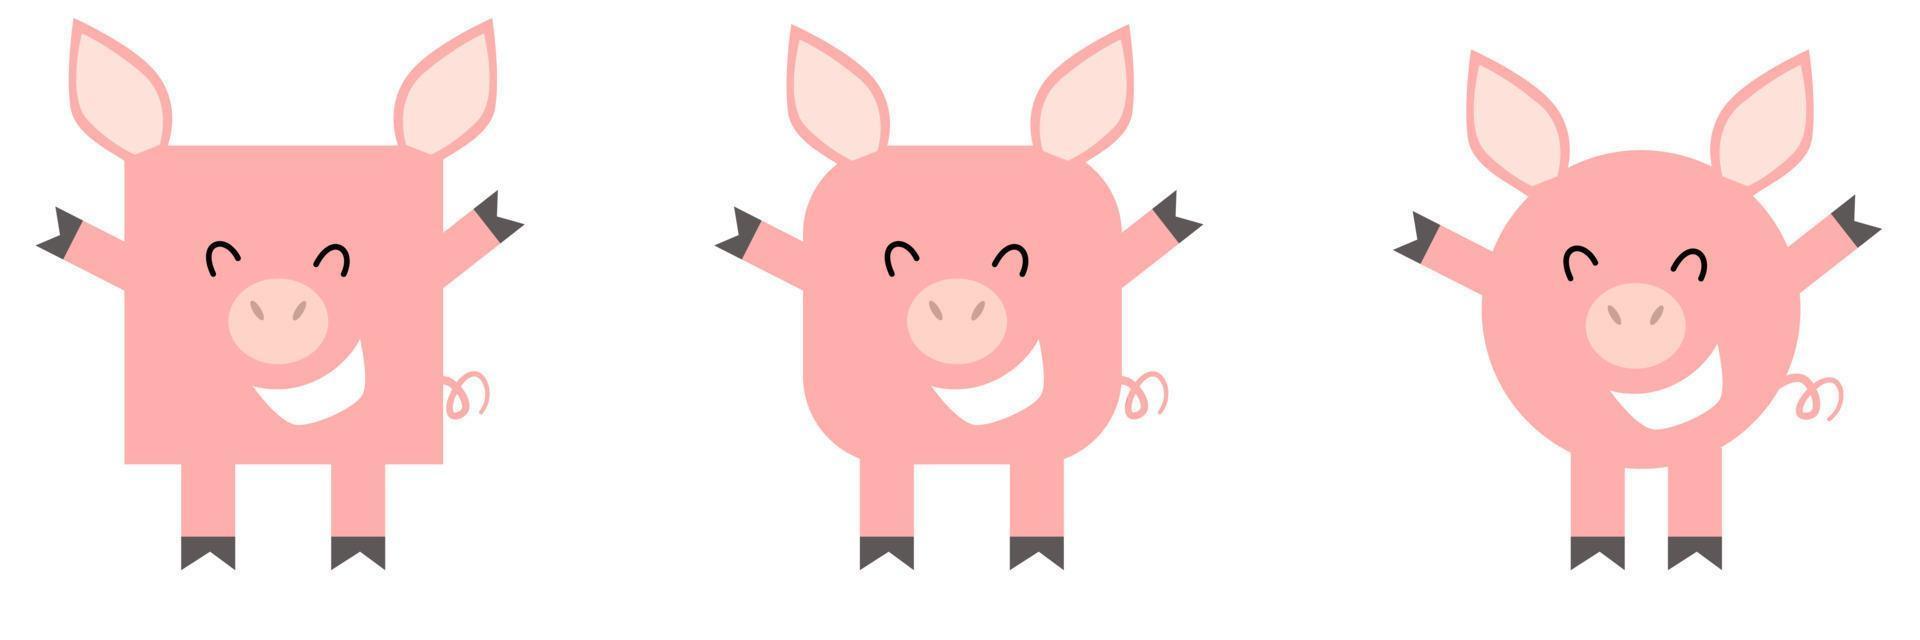 A set of animals of square and round shape. Vector illustration of a pig